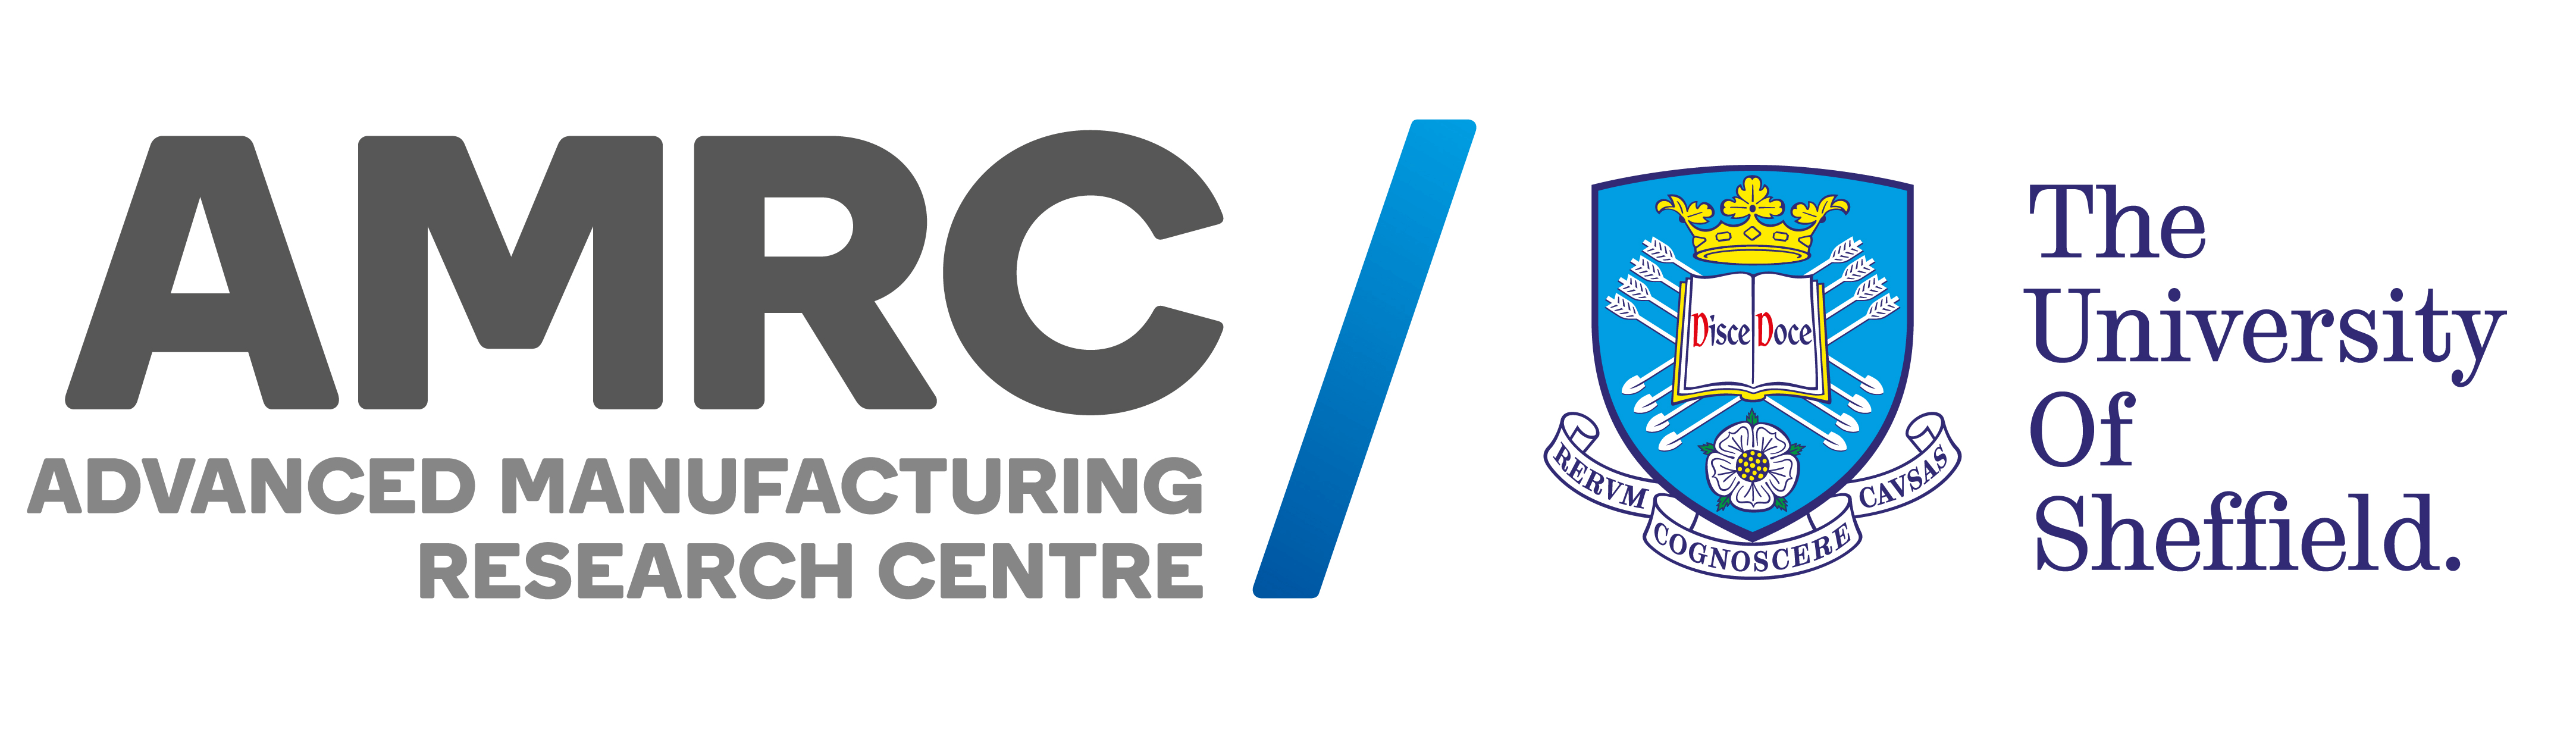 Old Boeing Logo - AMRC University of Sheffield Advanced Manufacturing Research